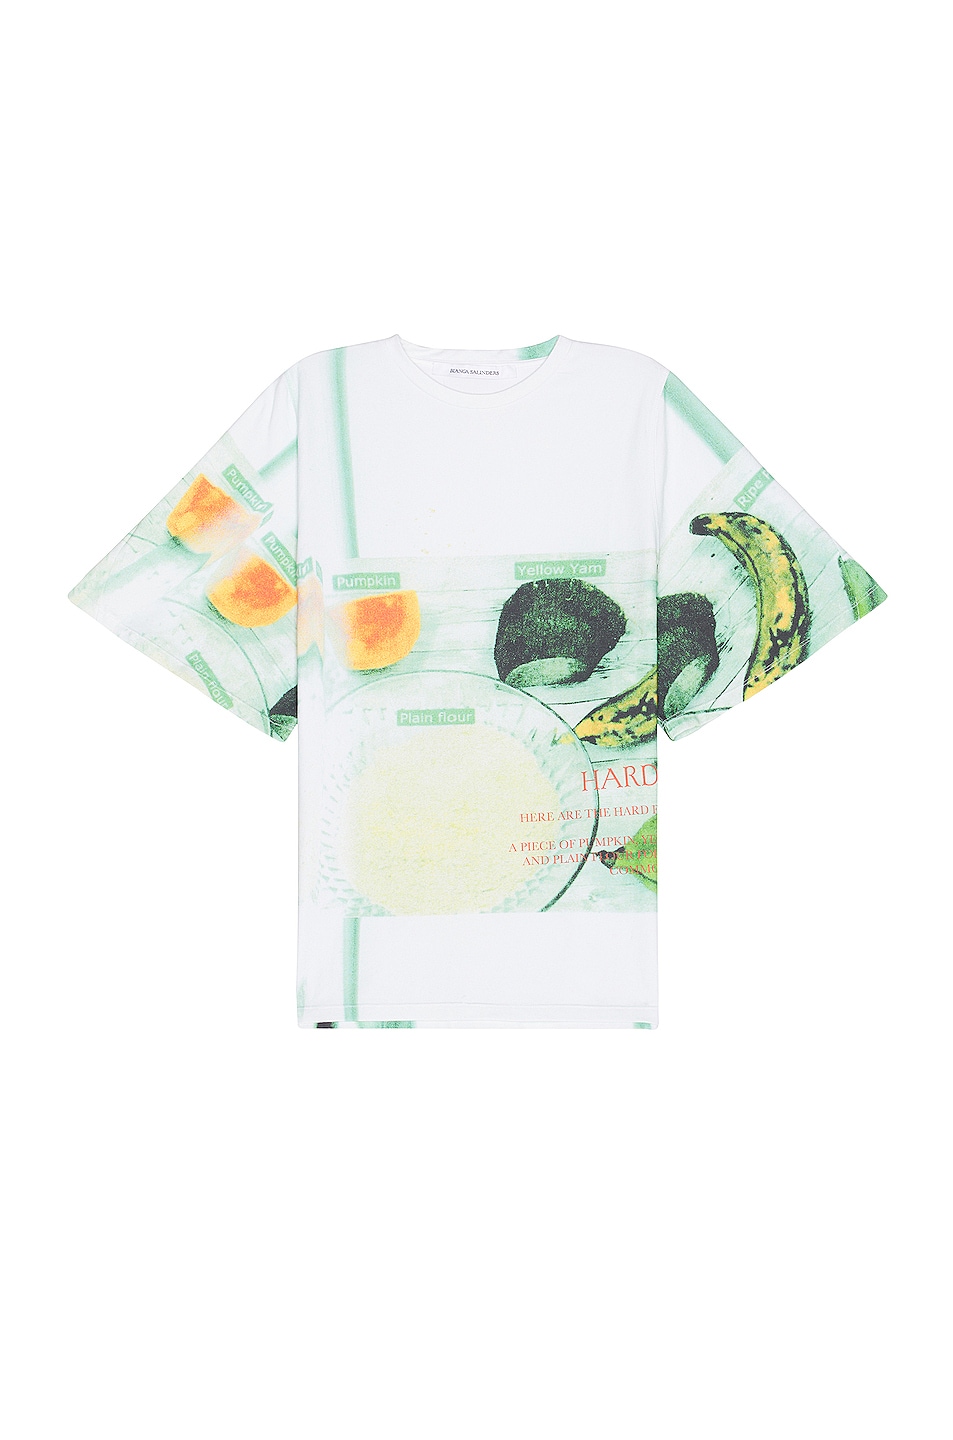 Image 1 of Bianca Saunders Hard Food Step 1 T-shirt in Light Blue, Green, & Yellow